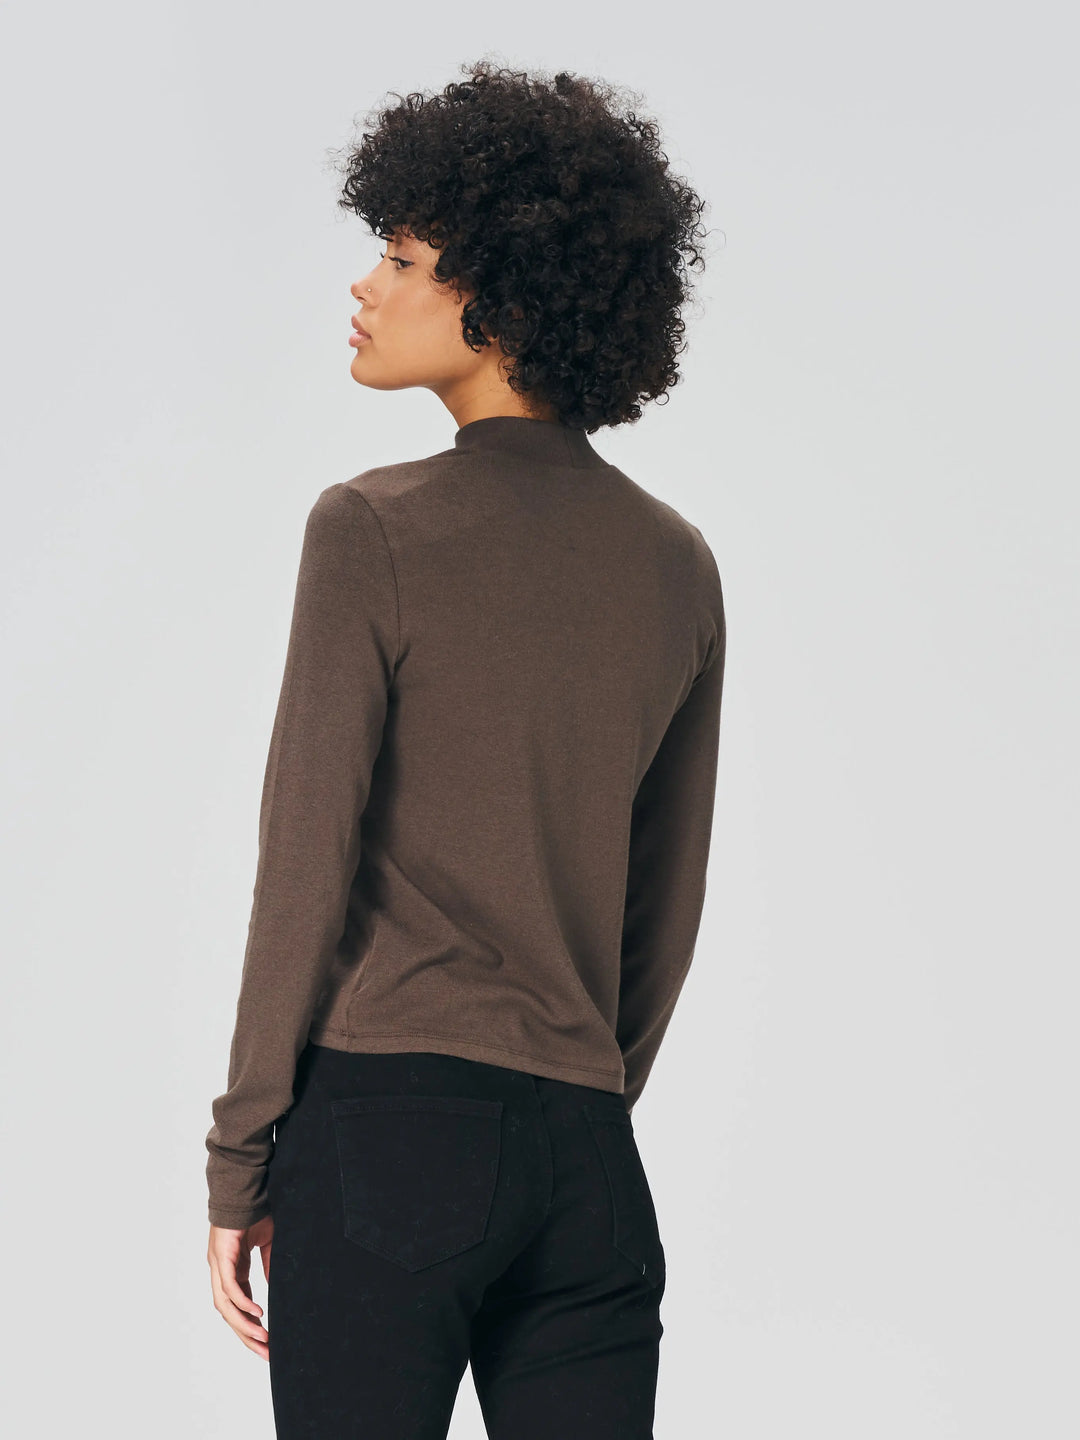 An image of a   8293 Knitted Layering Mock-Neck by  Mirra Masa